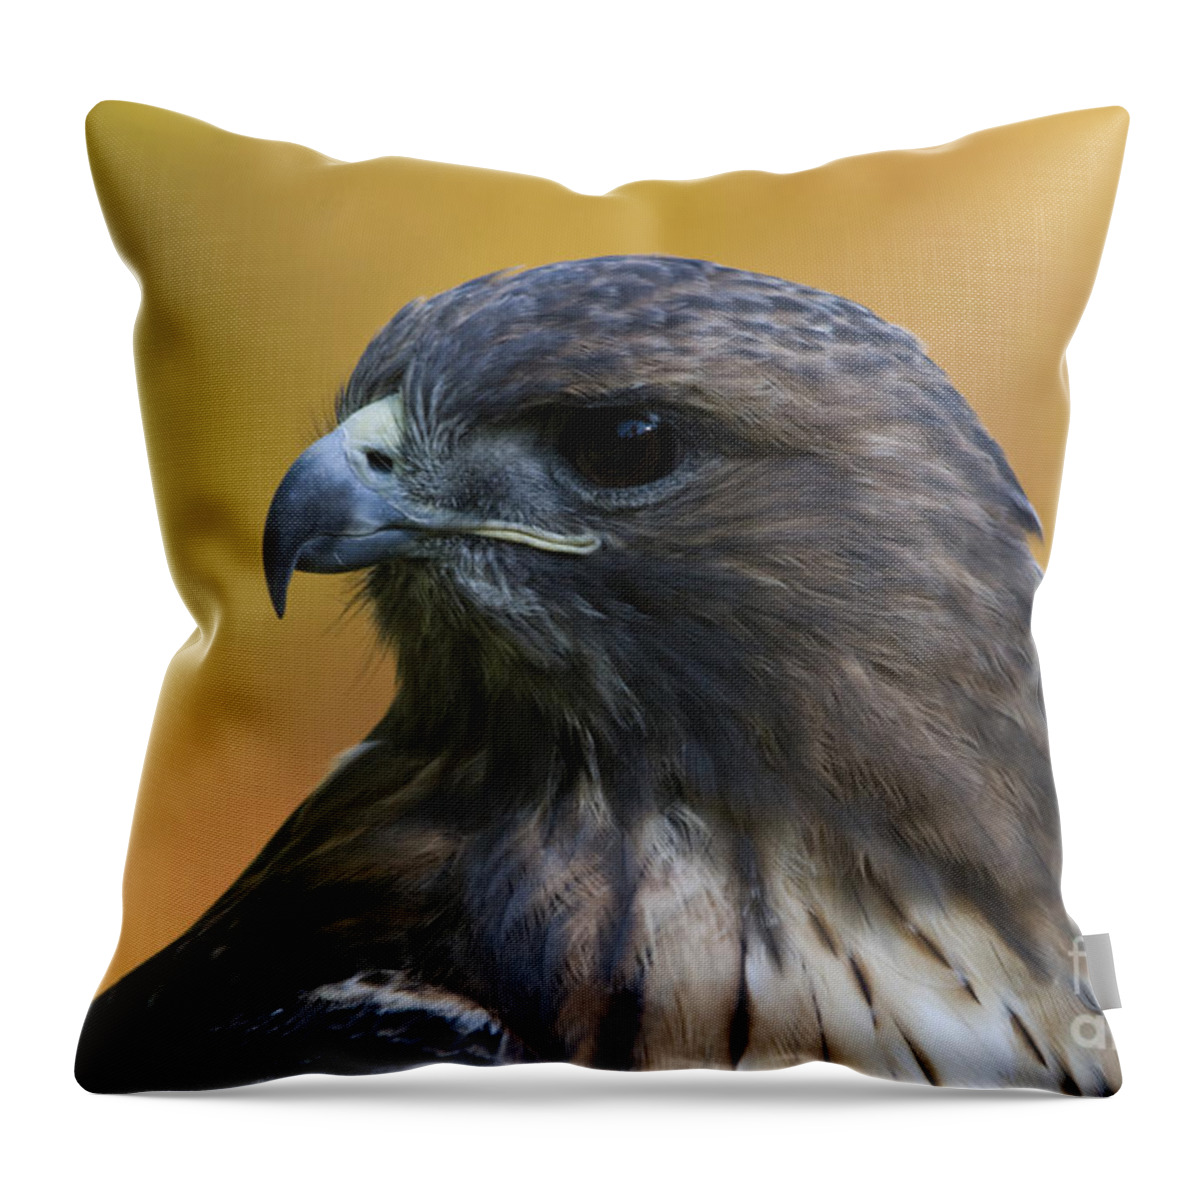 Red Tailed Hawk Throw Pillow featuring the photograph Red Tailed Hawk by John Greco